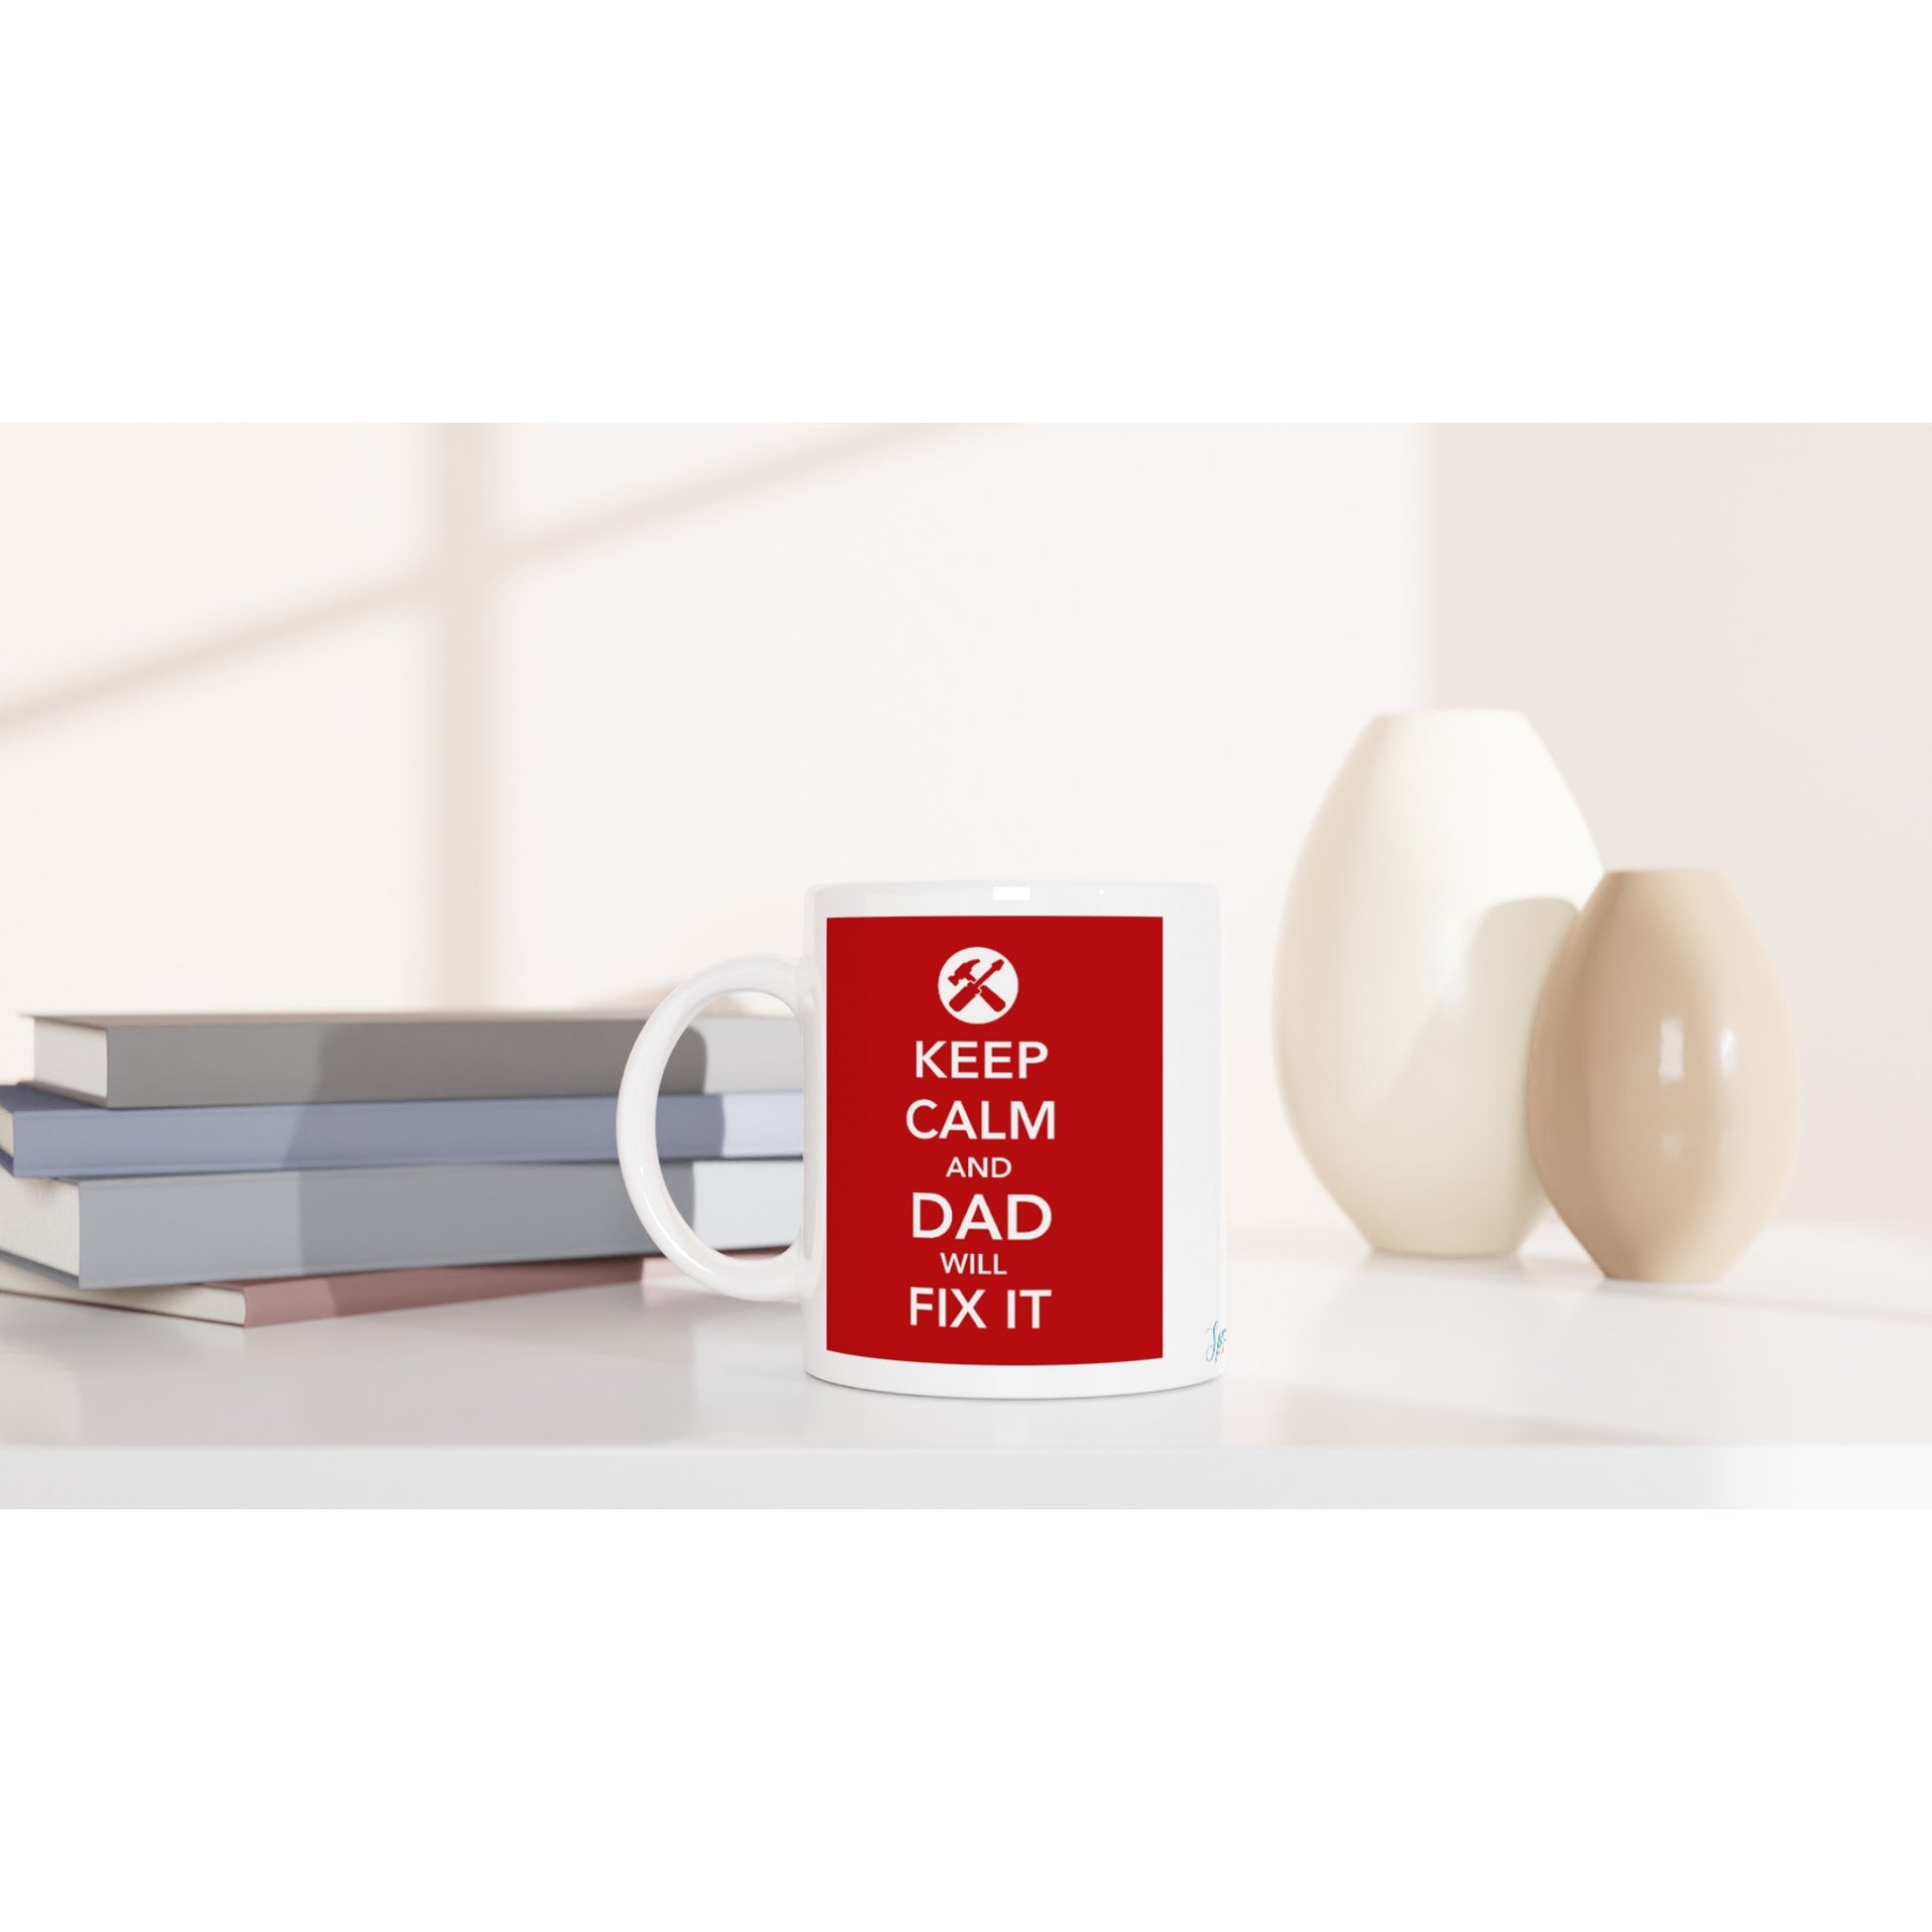  "Keep Calm and Dad Will Fix It" Mug on table